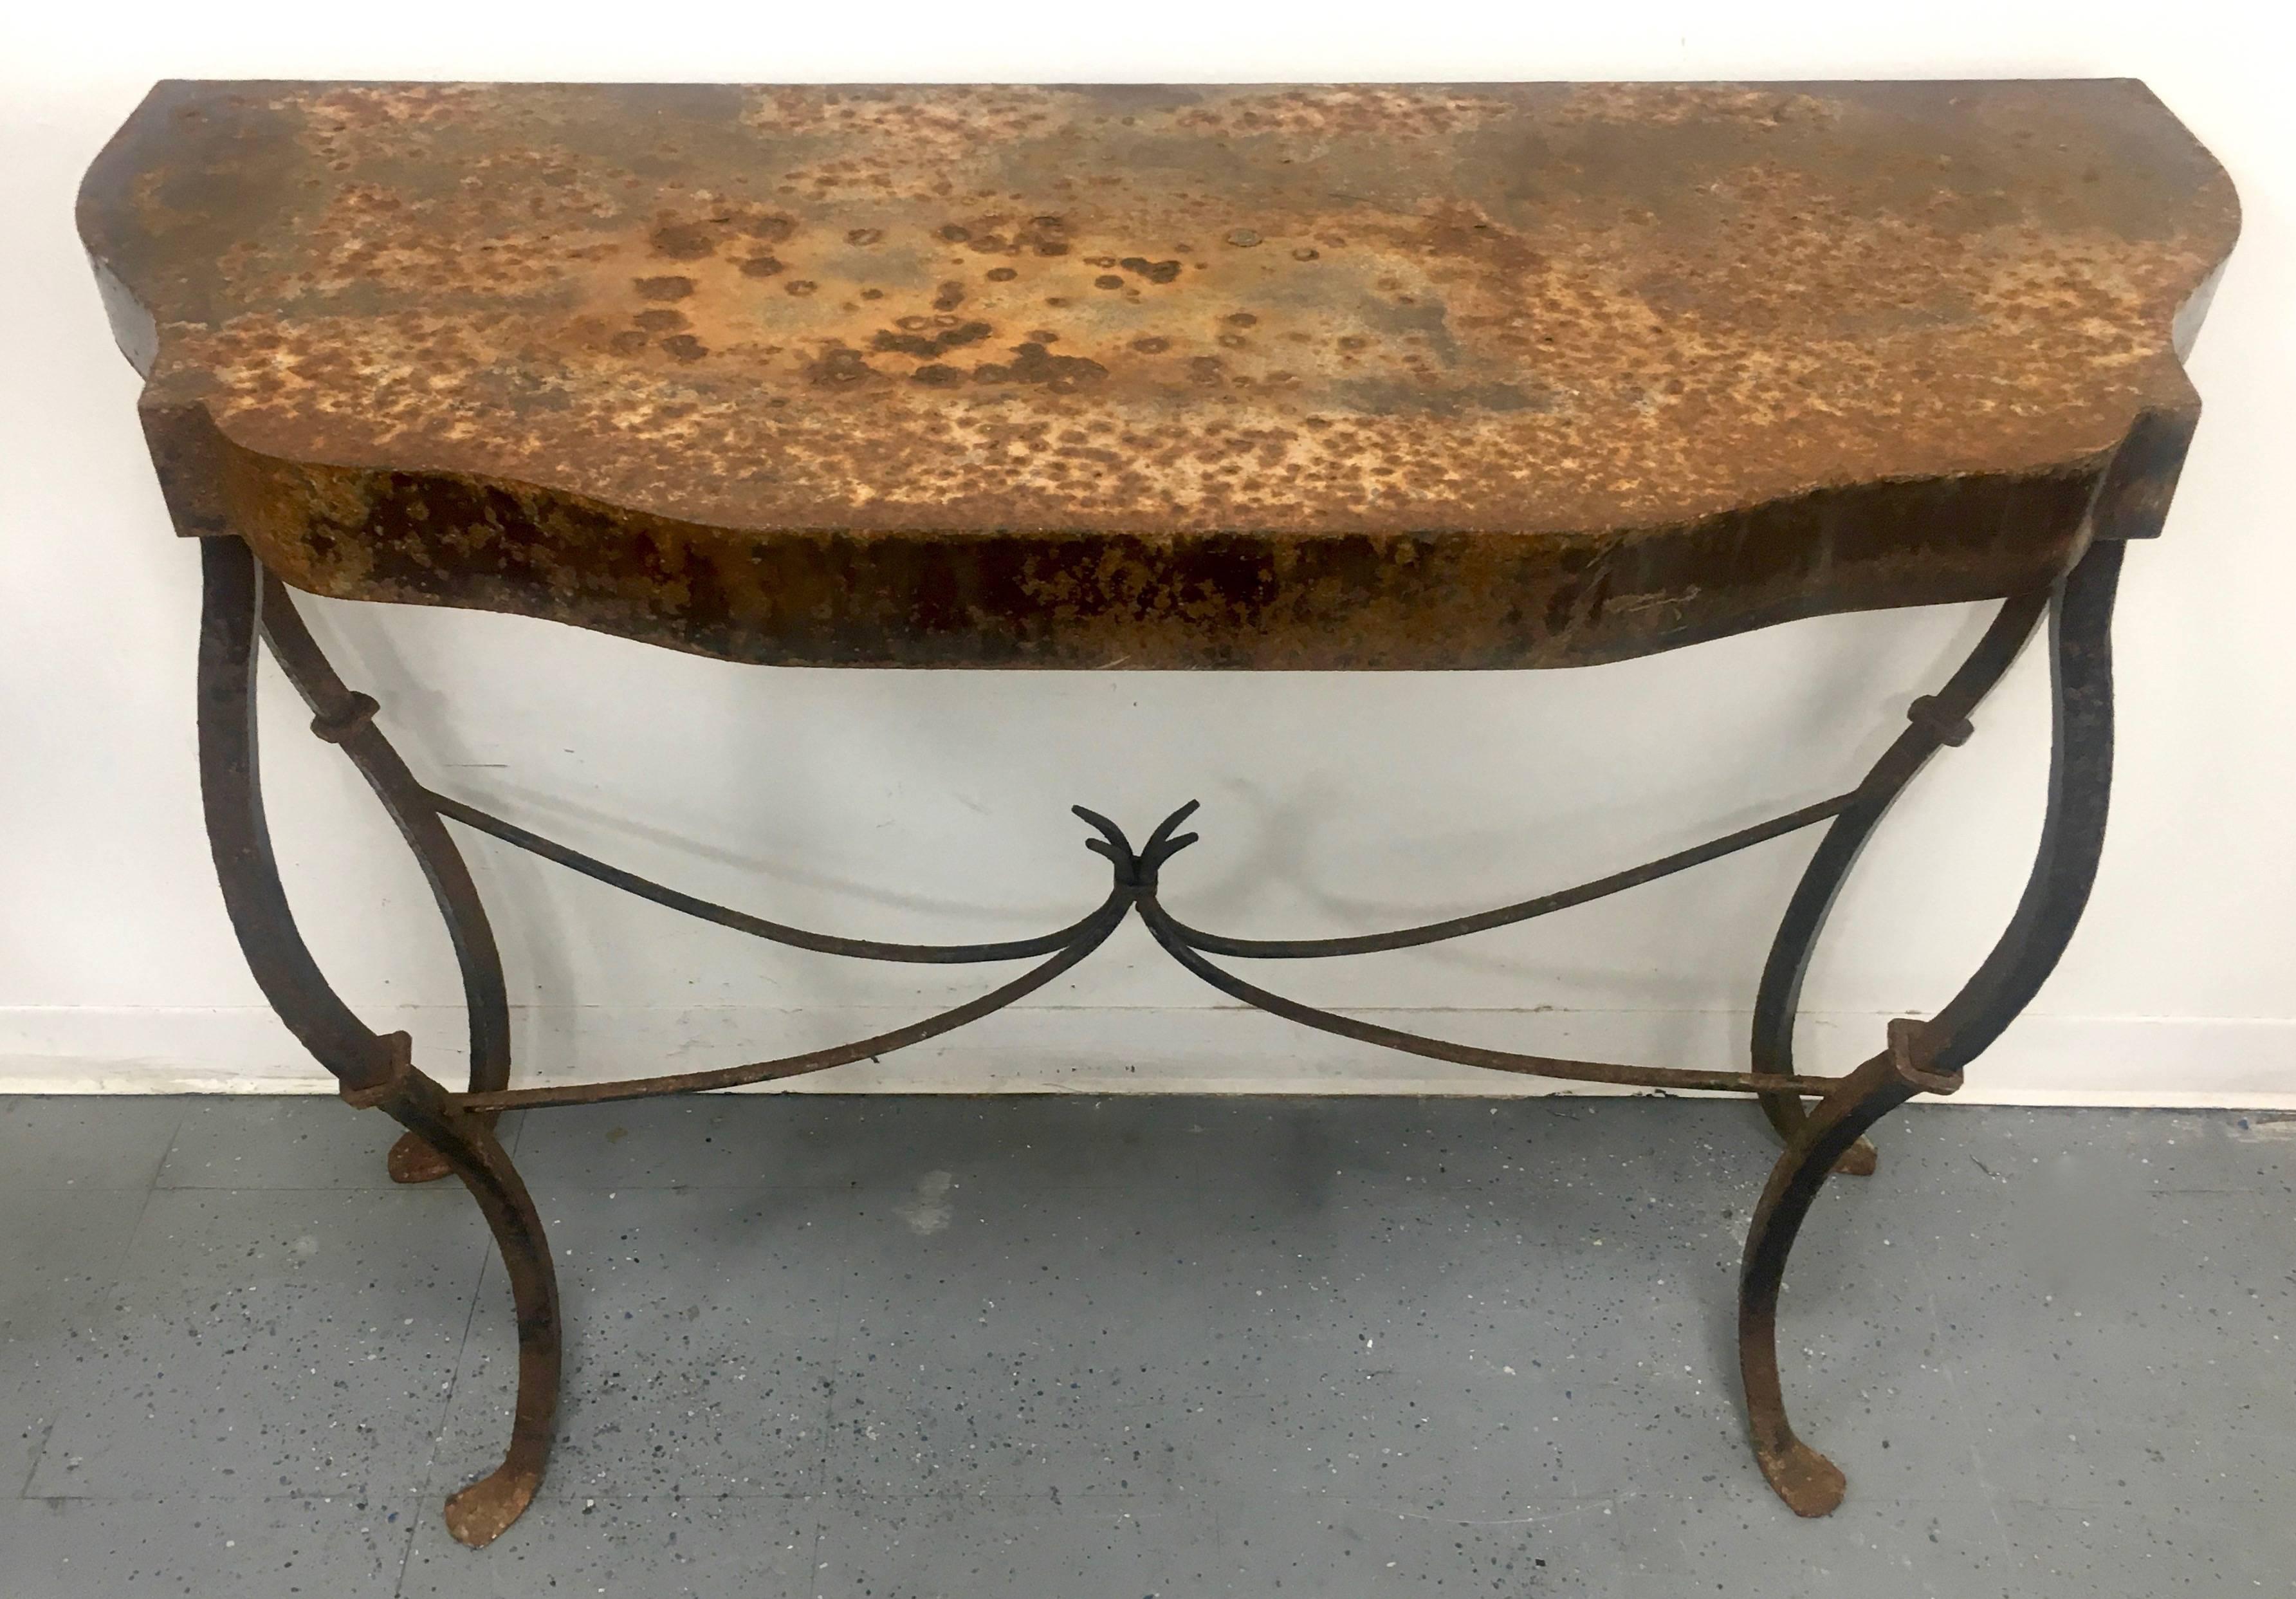 Fantastic French wrought iron table with many years of weathered patina... so amazing this cannot be made up - a compliment to the modern interior and also the French Farmhouse... with the right accessories this little gem will compliment any look.